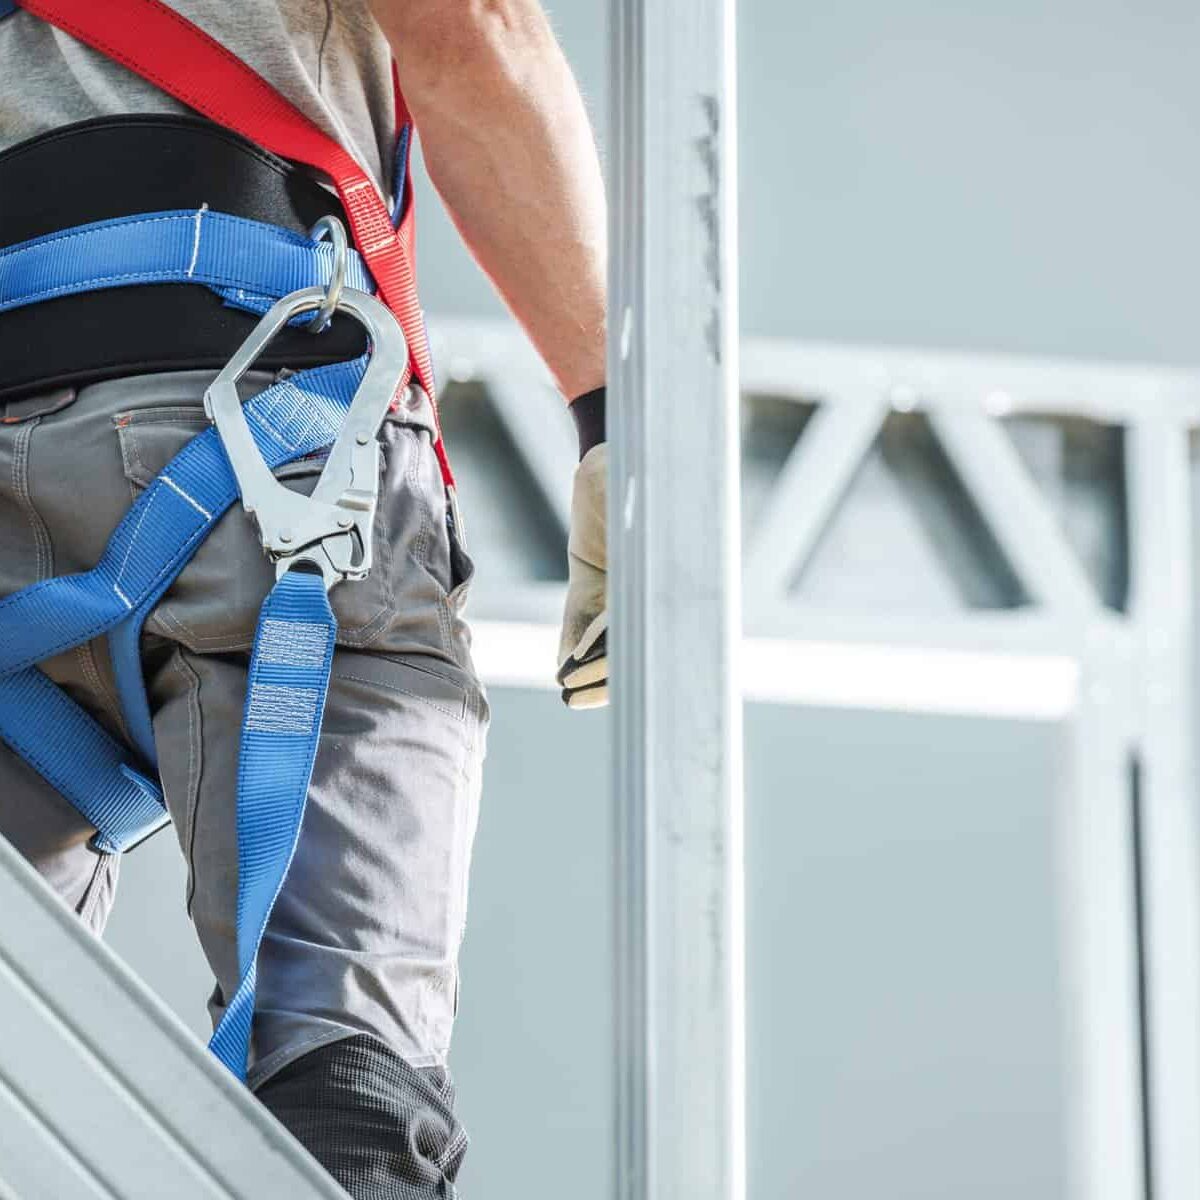 Construction Safety Harness Equipment. Industrial Security and Protection. Contractor at Height Closeup Photo.